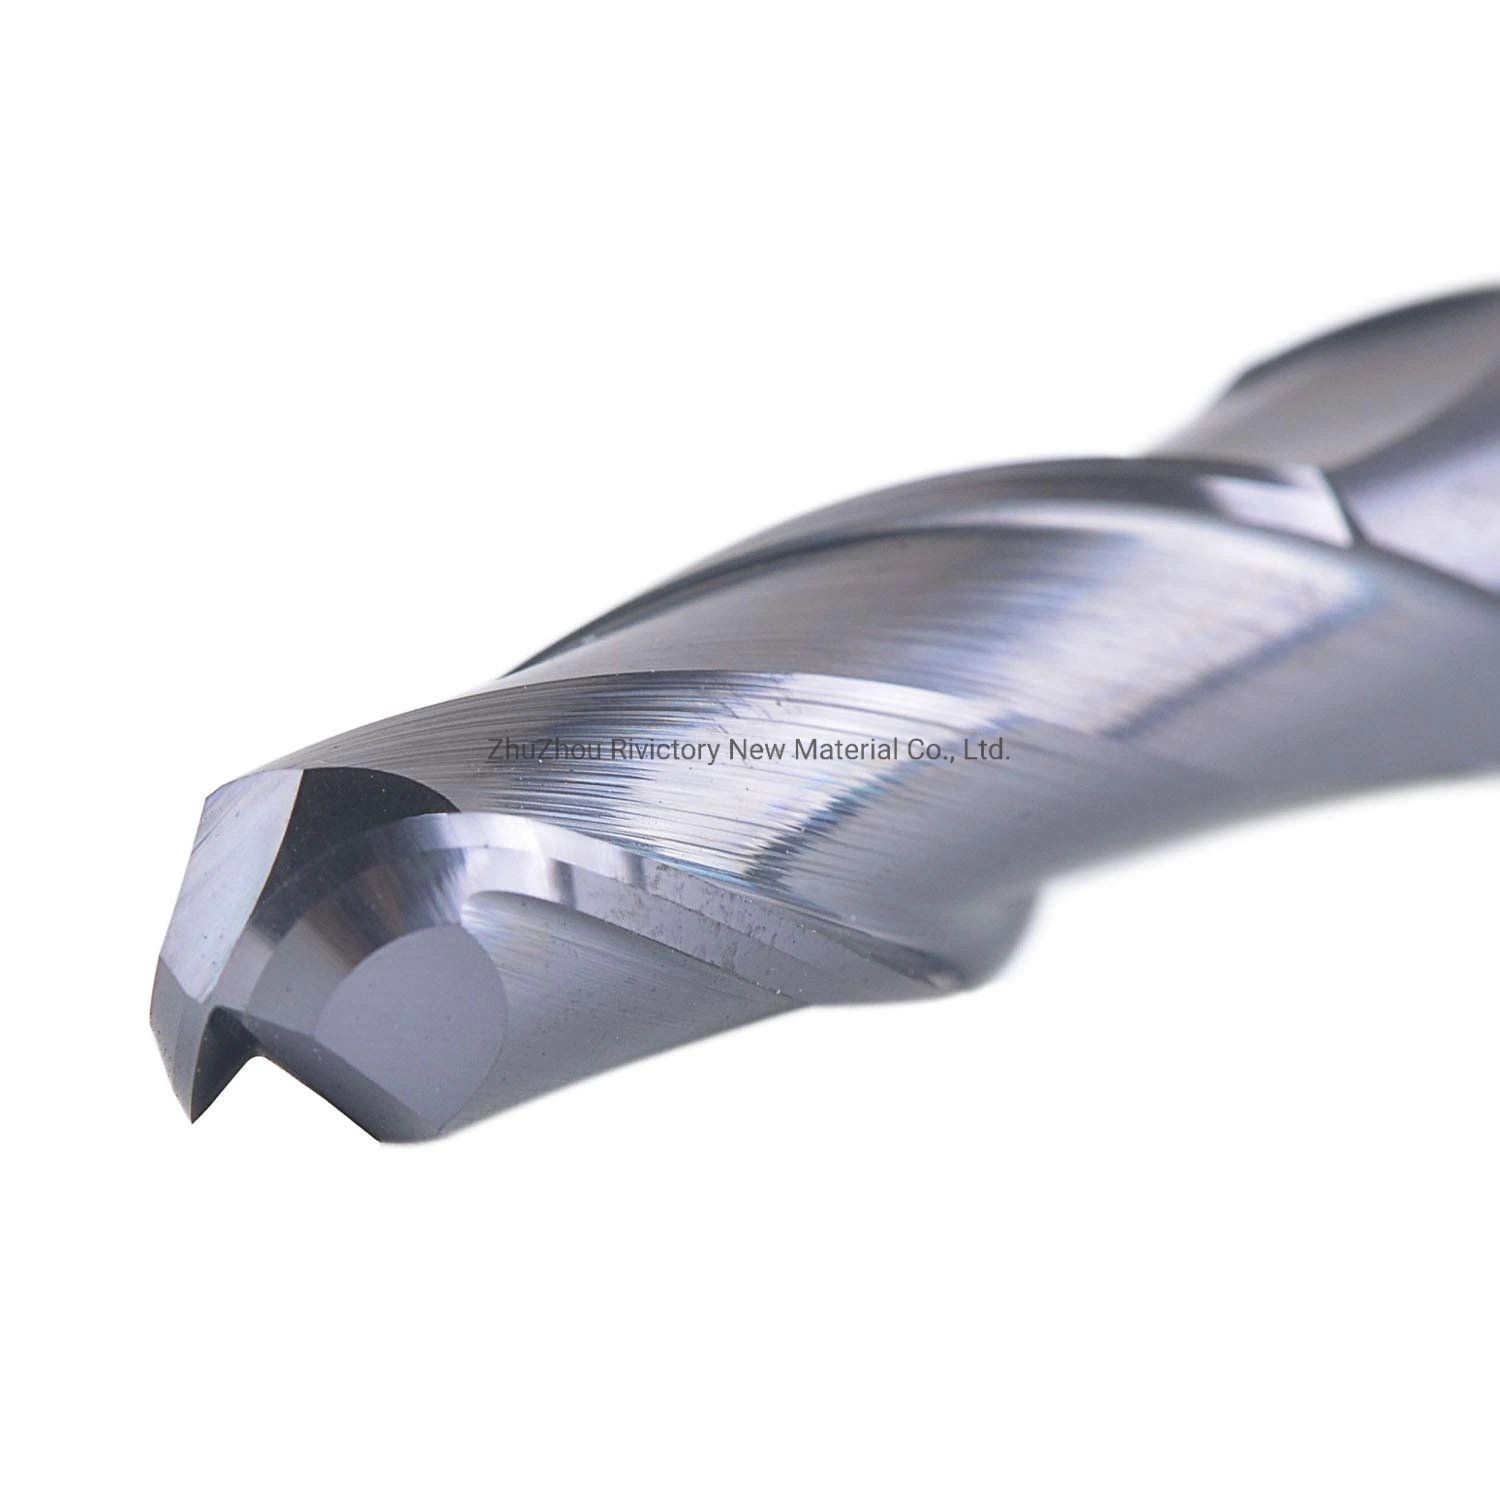 Spherical Extra Long Shank Tungsten Solid Carbide End Mill Machinery Hardware Tools Metal Drilling Spade Ball Nose Mill Cutting